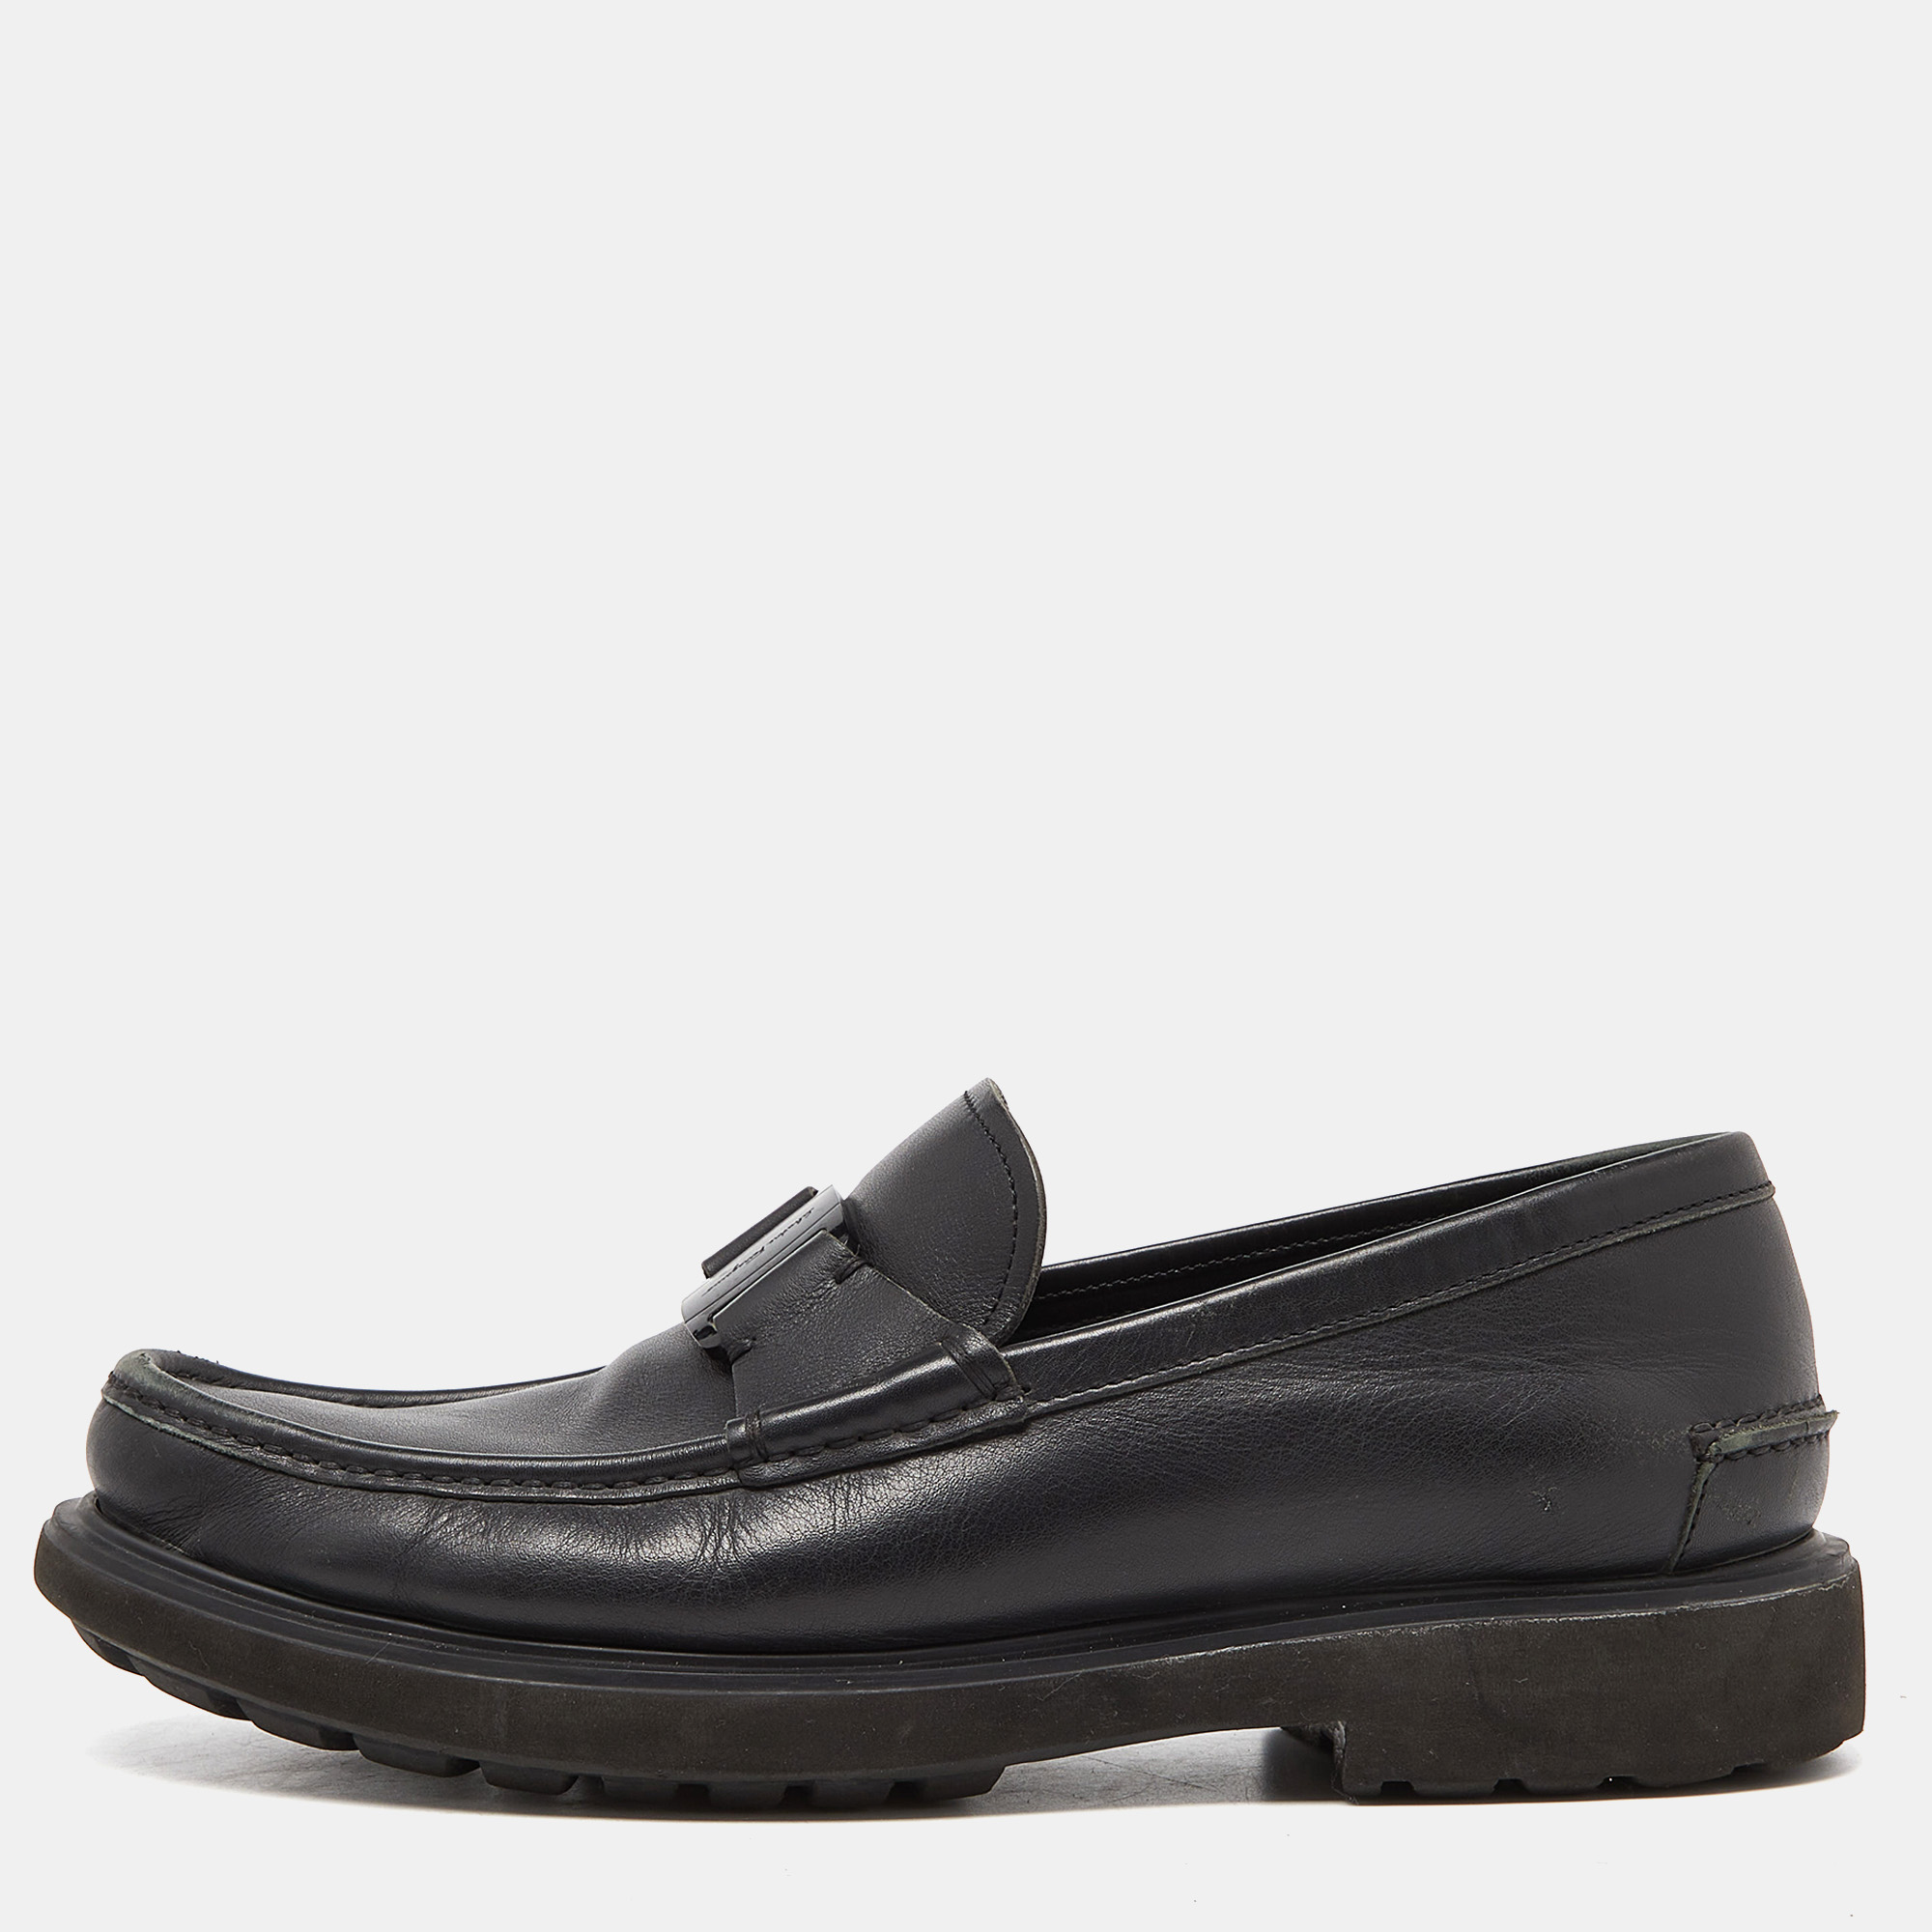 Pre-owned Ferragamo Black Leather Loafers Size 44